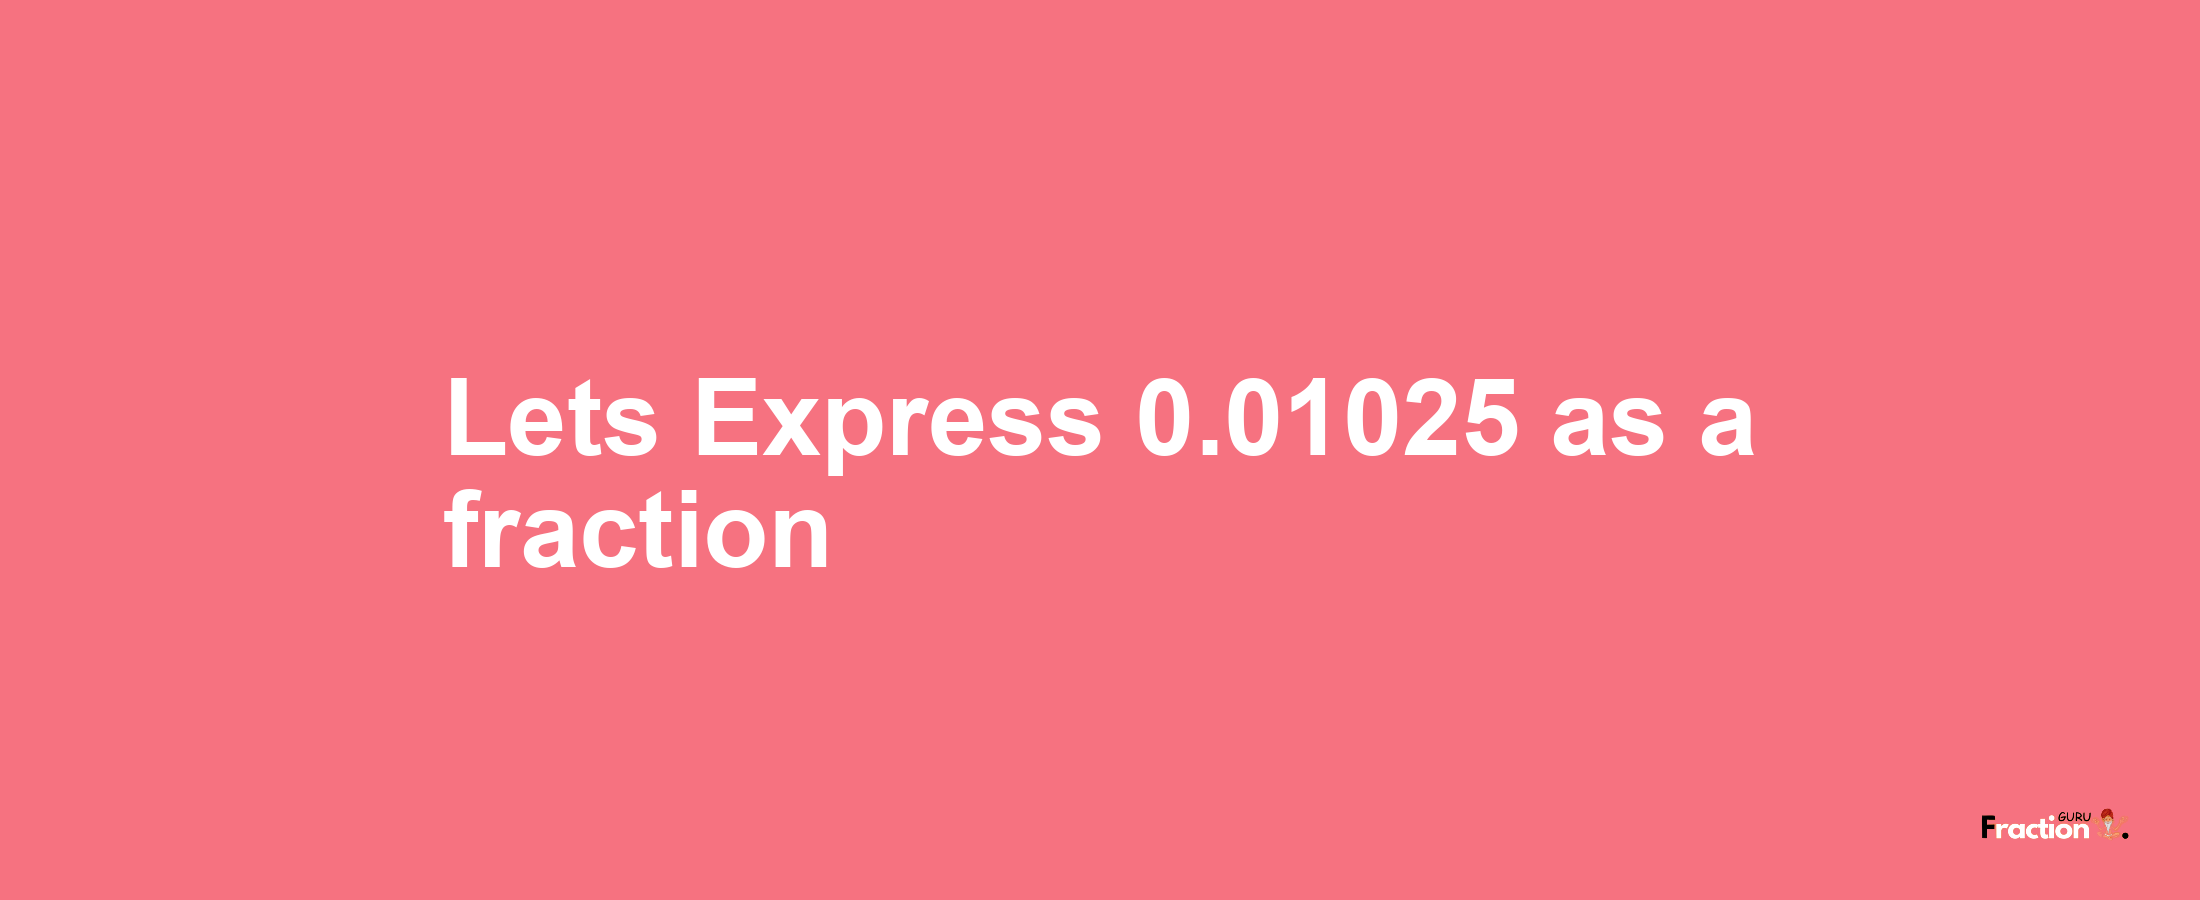 Lets Express 0.01025 as afraction